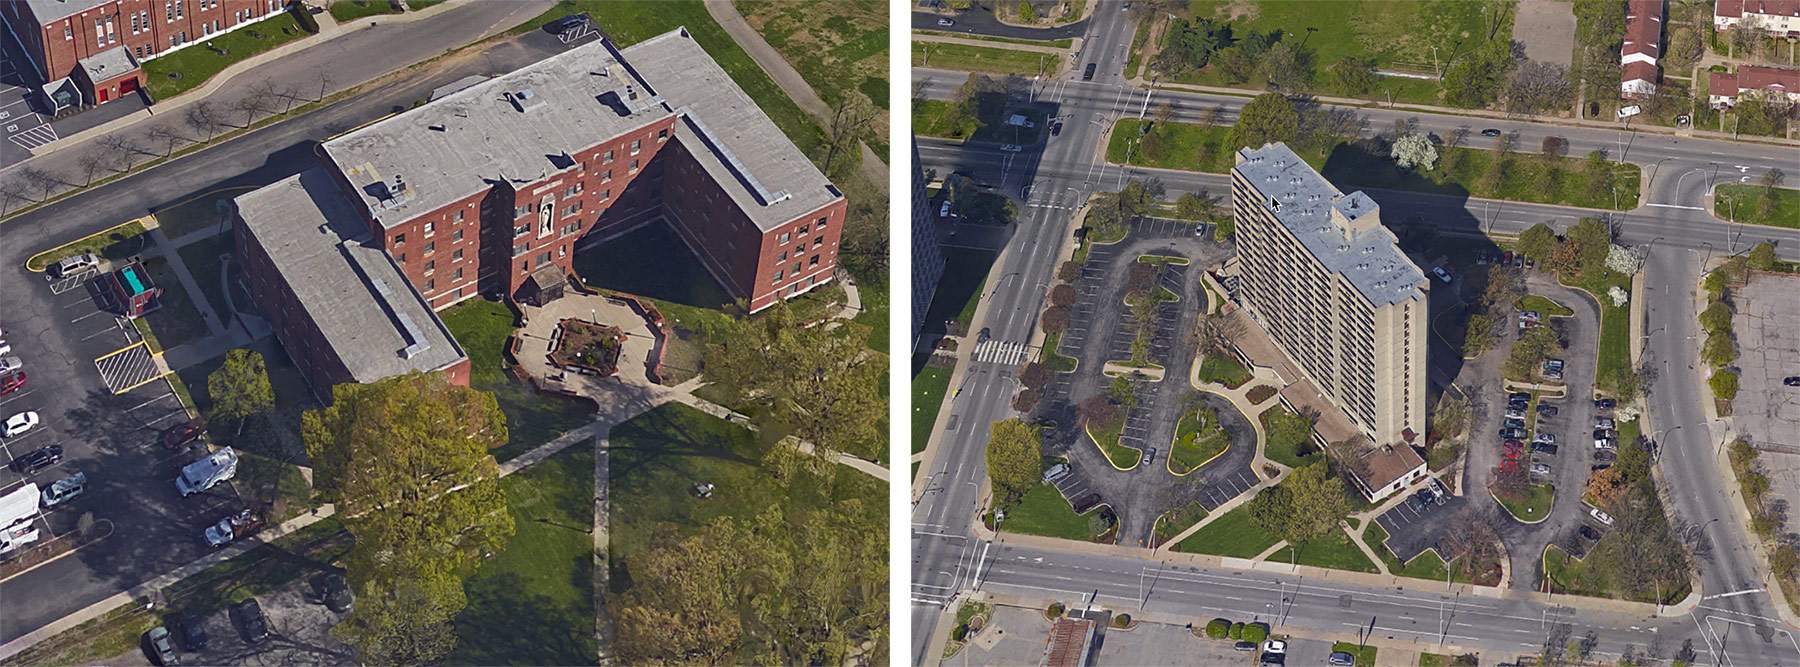 Lourdes Hall, left, and Avenue Plaza, right, are both slated for expensive parking lot repaving projects. (Courtesy Google)